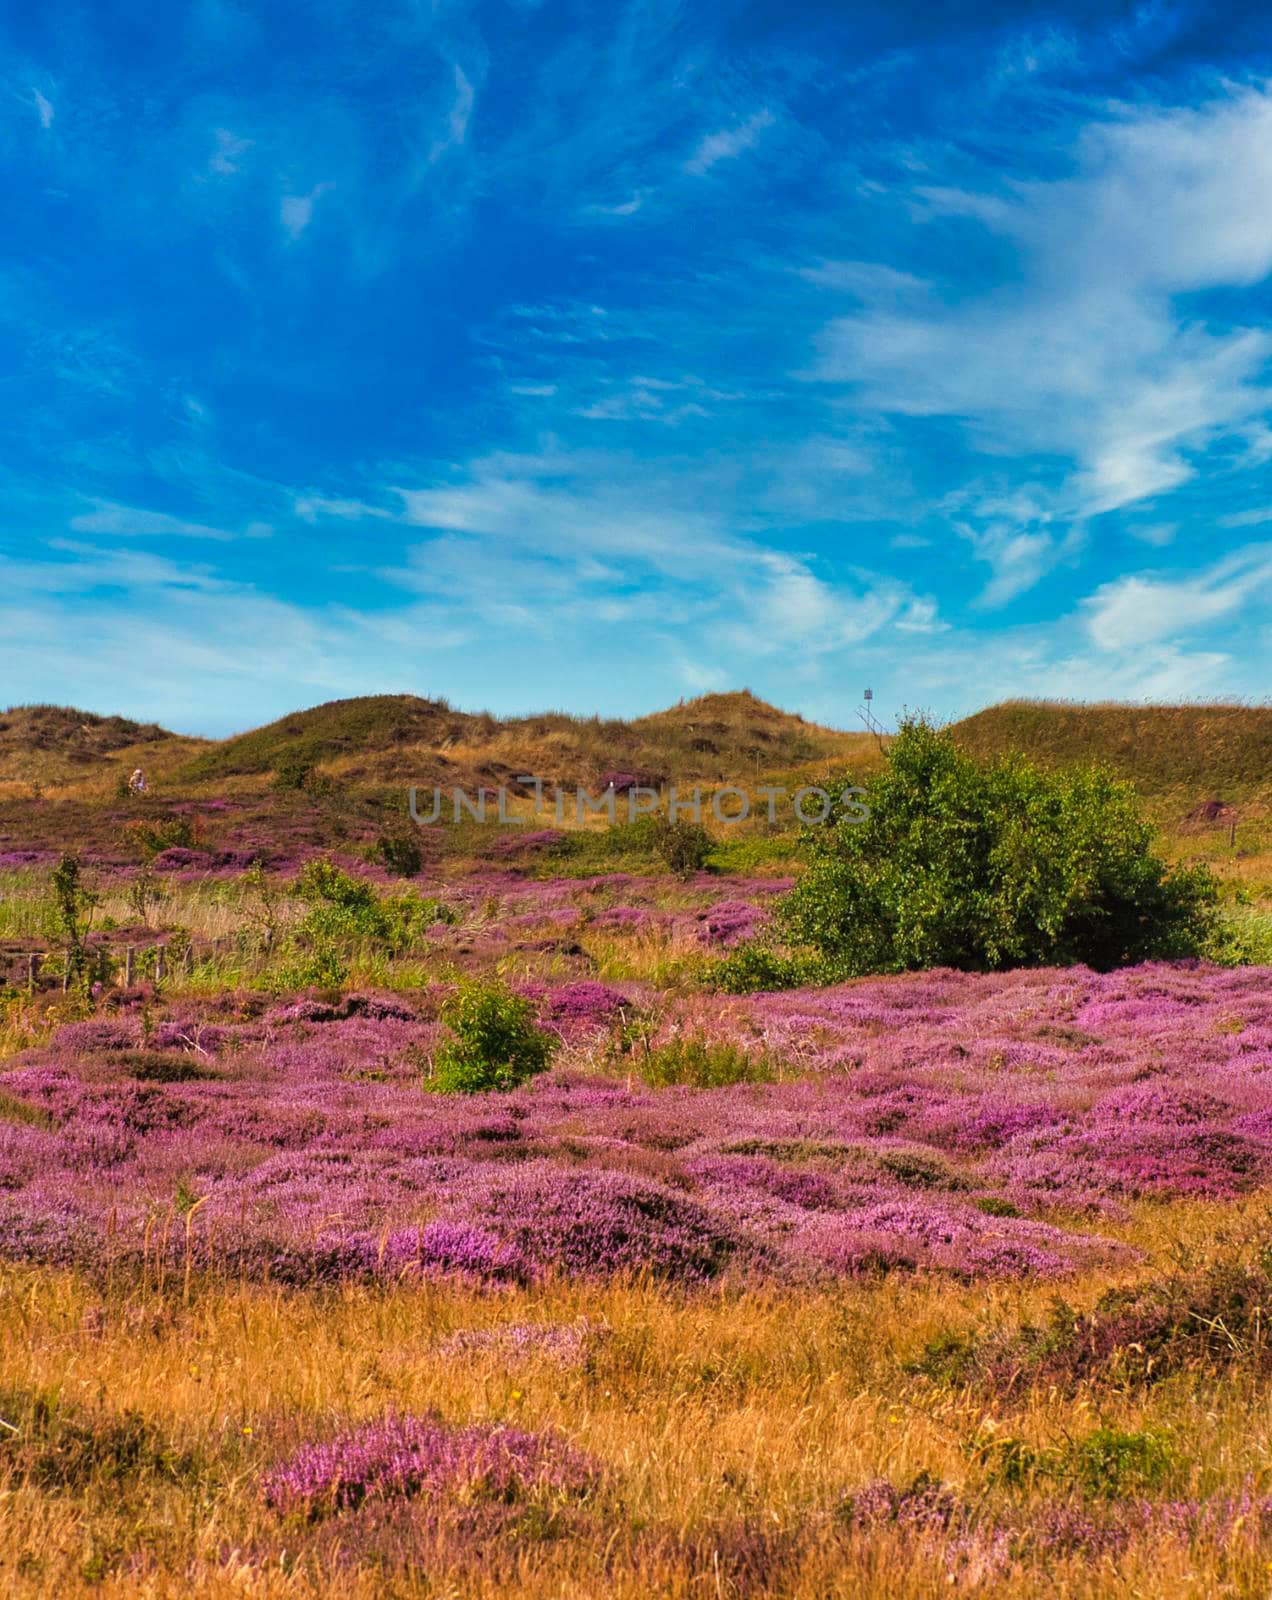 Island of Texel - Netherlands - wonderfull plants in pink at the dune - no people